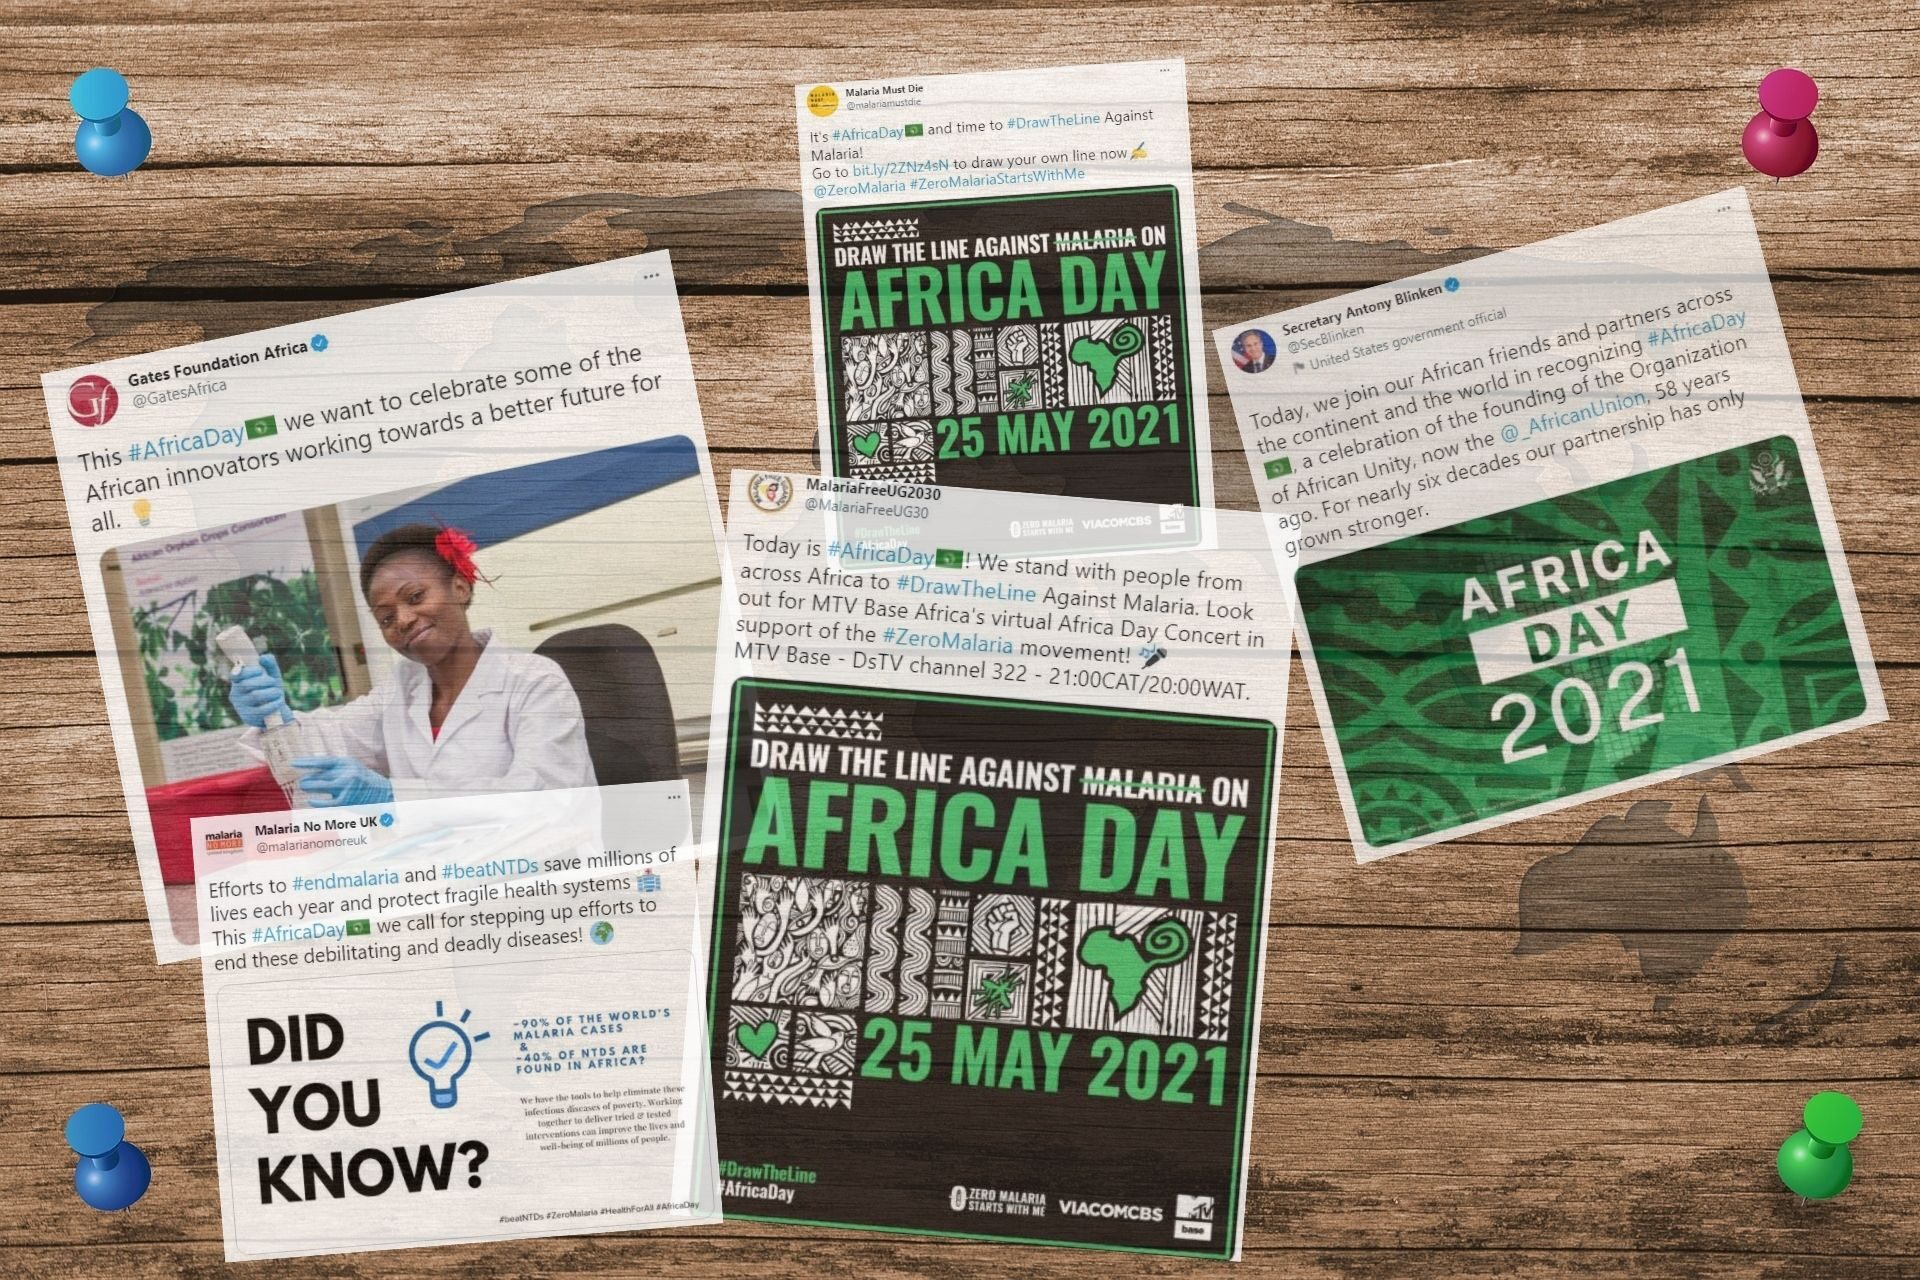 Africa Day 2021 - the best of social media